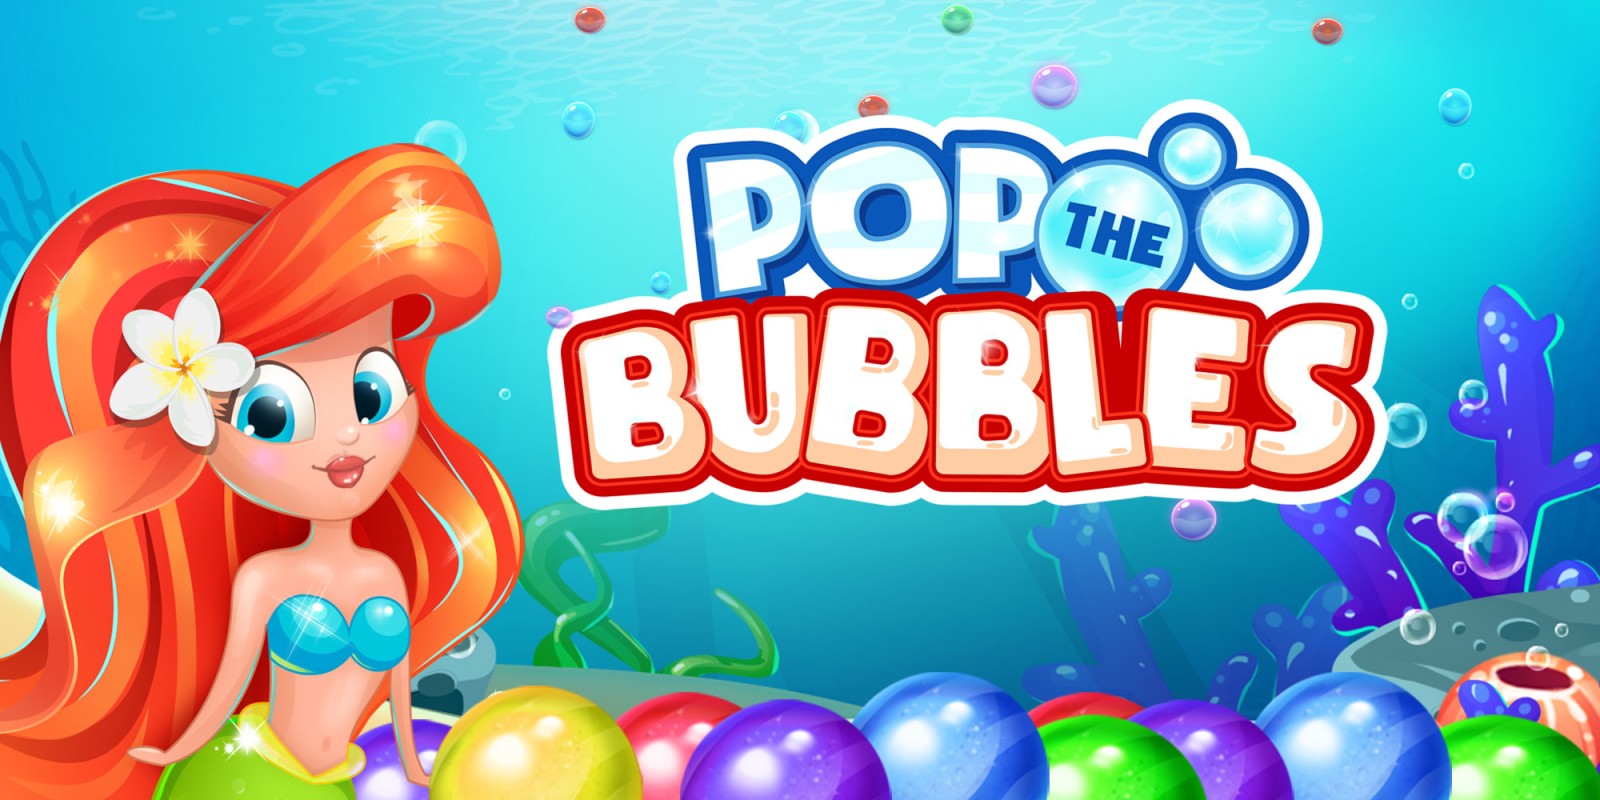 bubble pop game on facebook